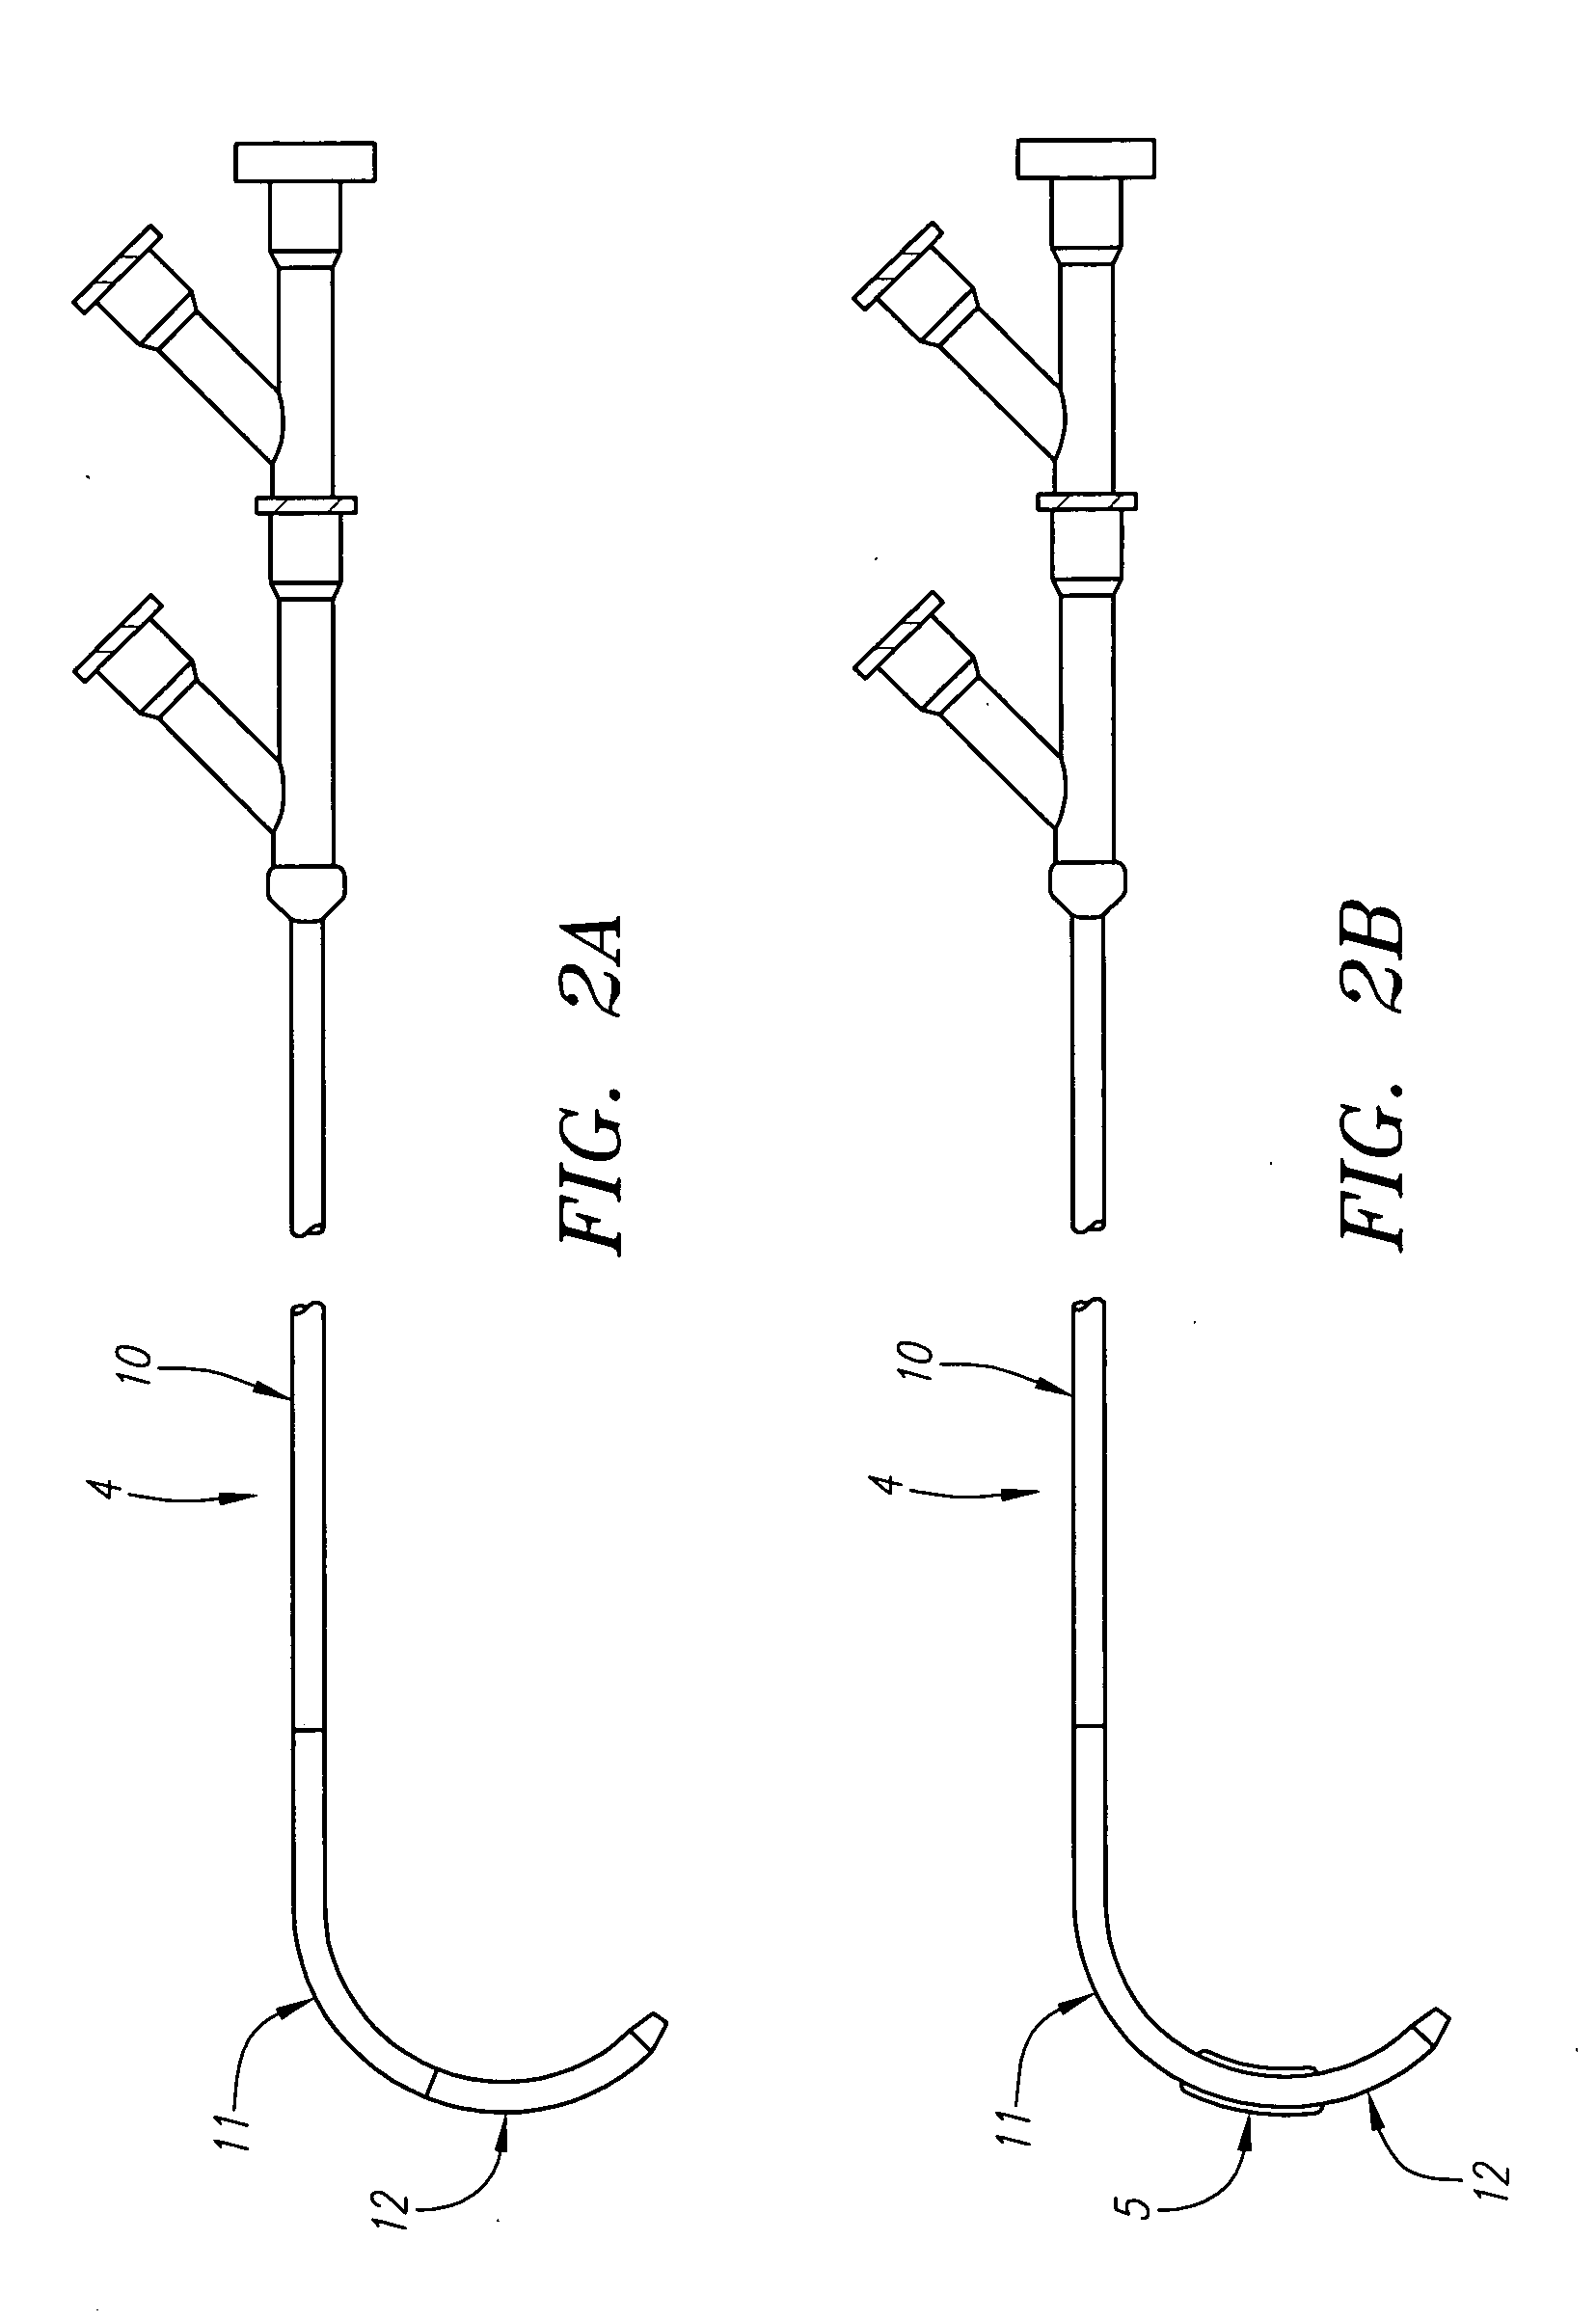 Methods and apparatus for localized and semi-localized drug delivery